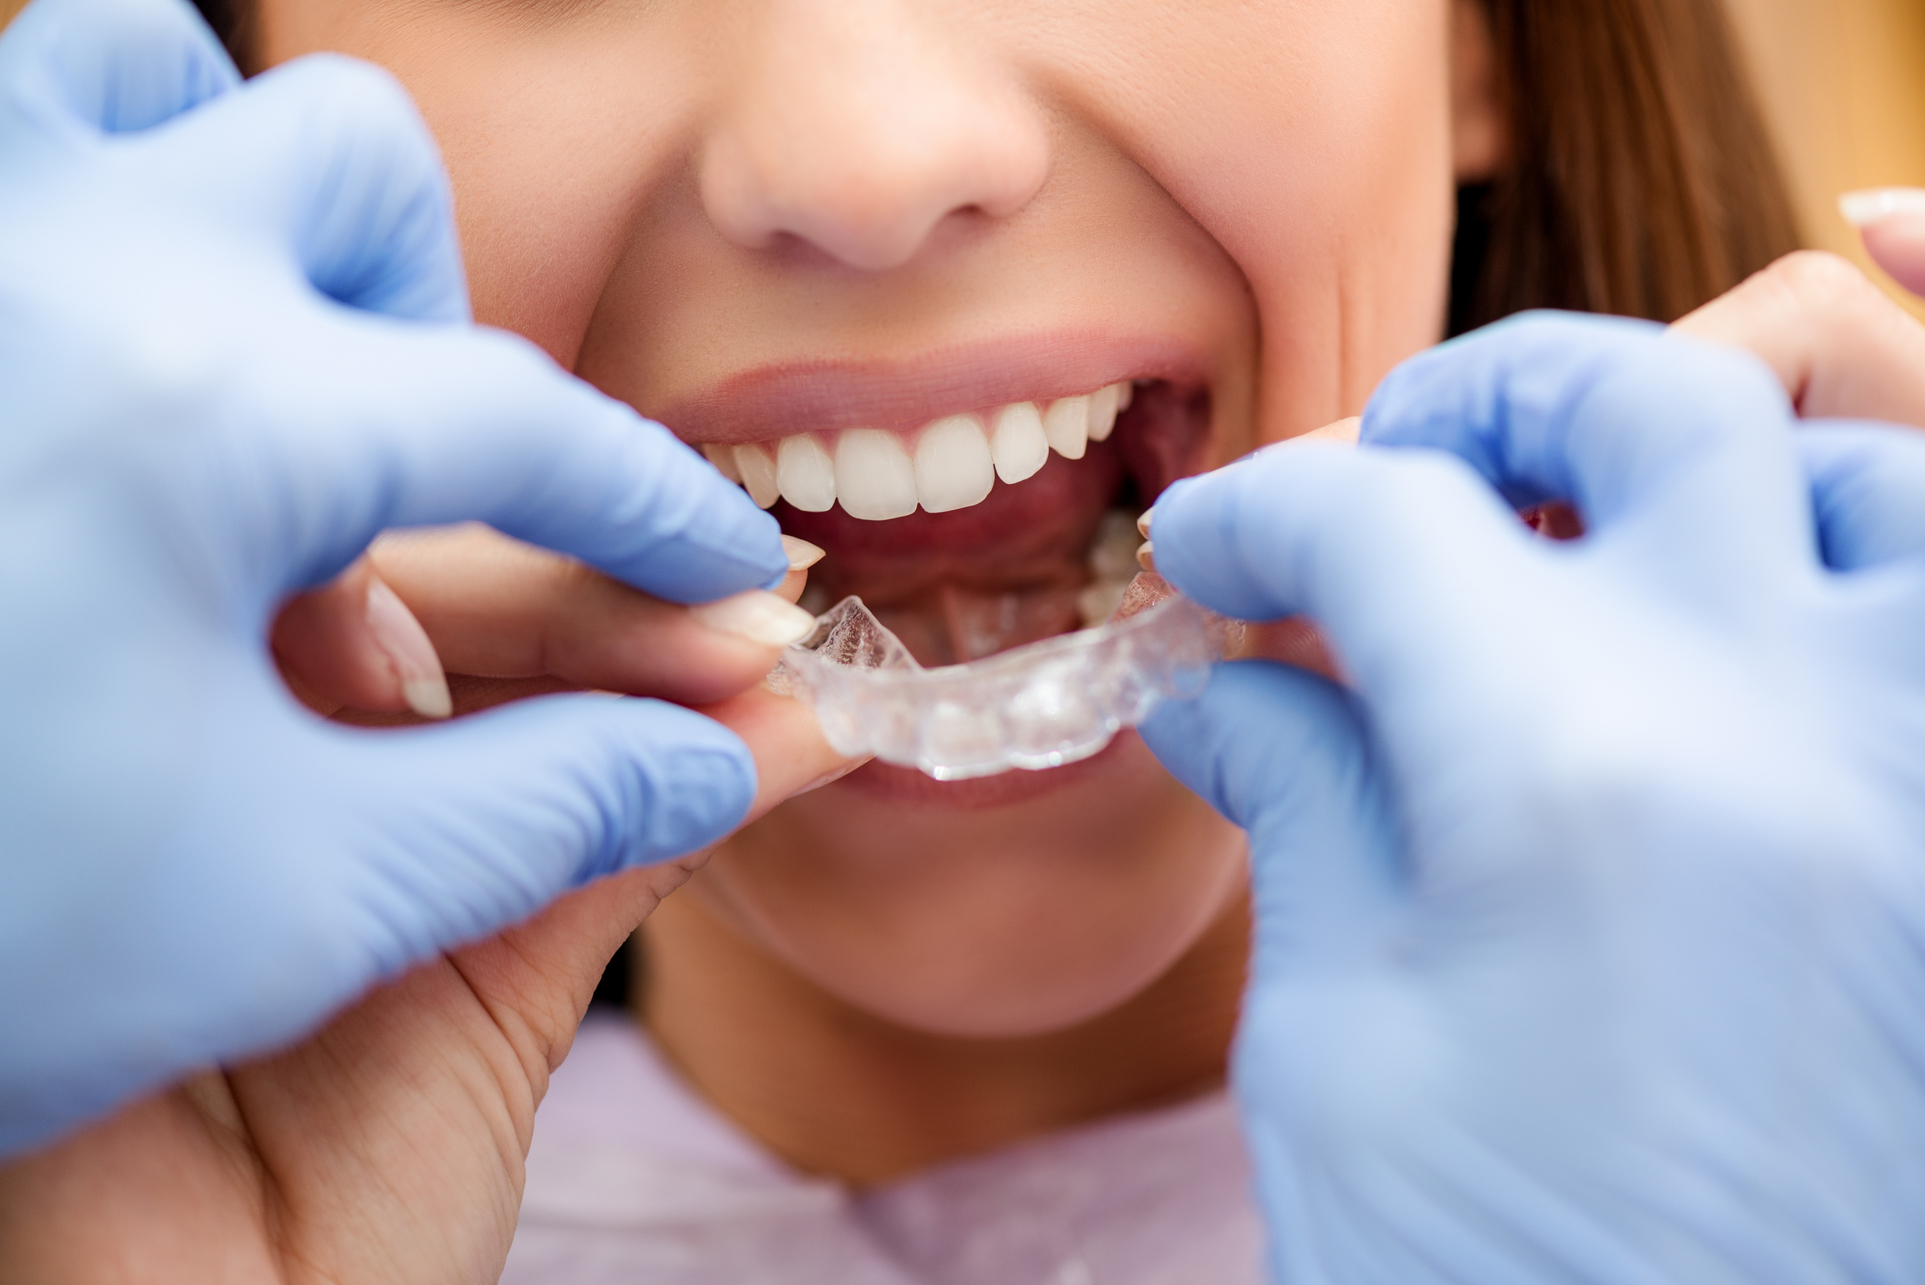 Dentist putting on clear braces for patient